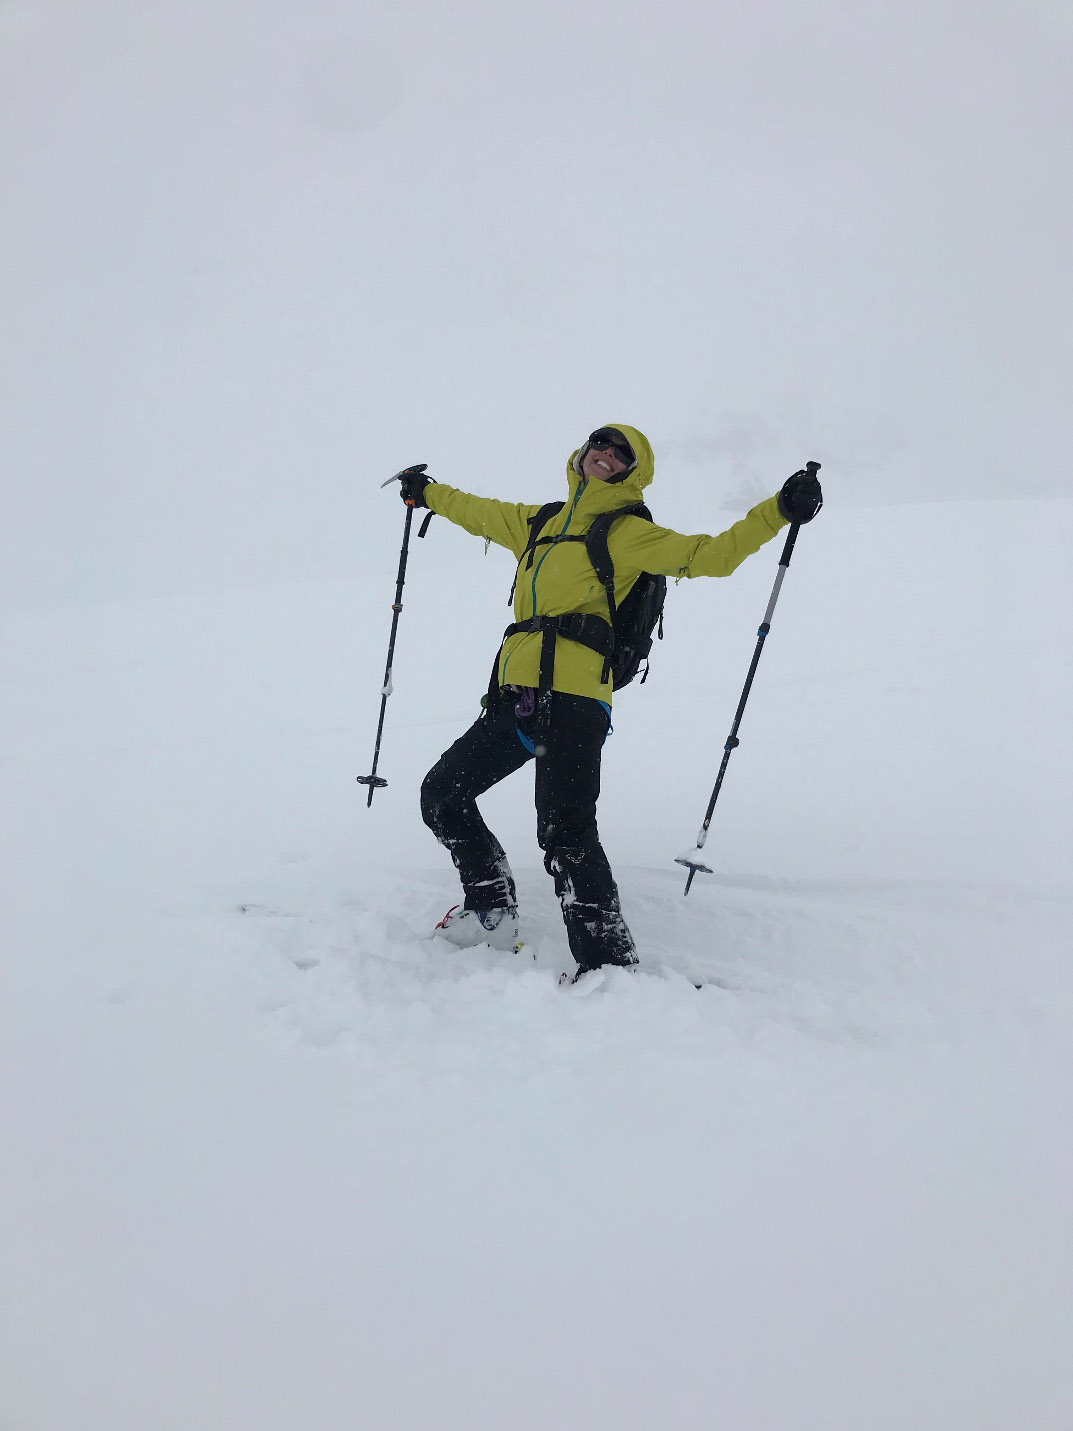 female mountaineer posing with arms raised celebratorily on a steep snowy slope